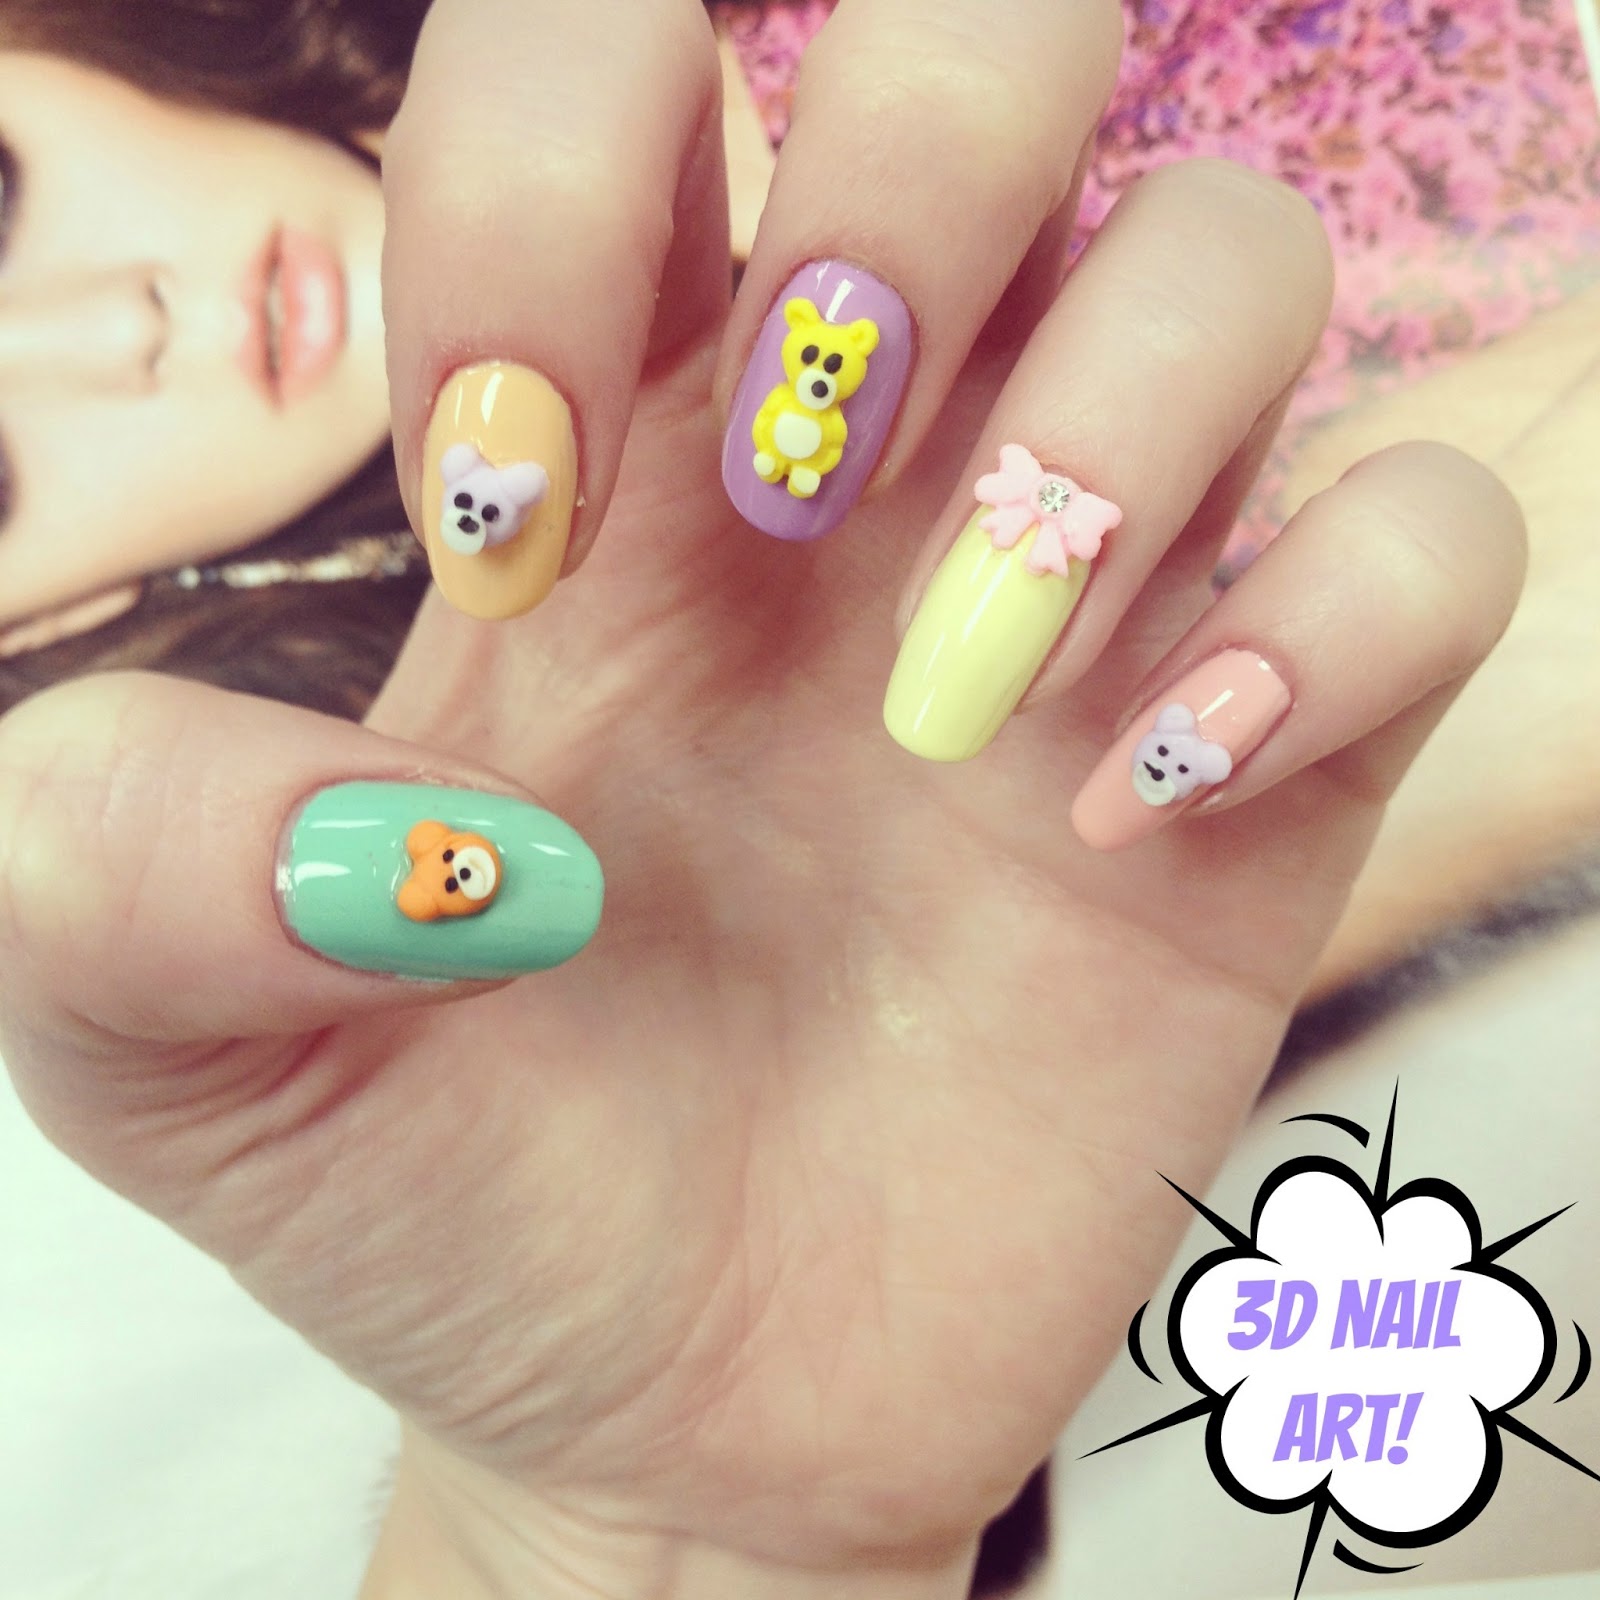 3D Nail Art Tutorial  Style  NAILS Magazine  HD Wallpapers